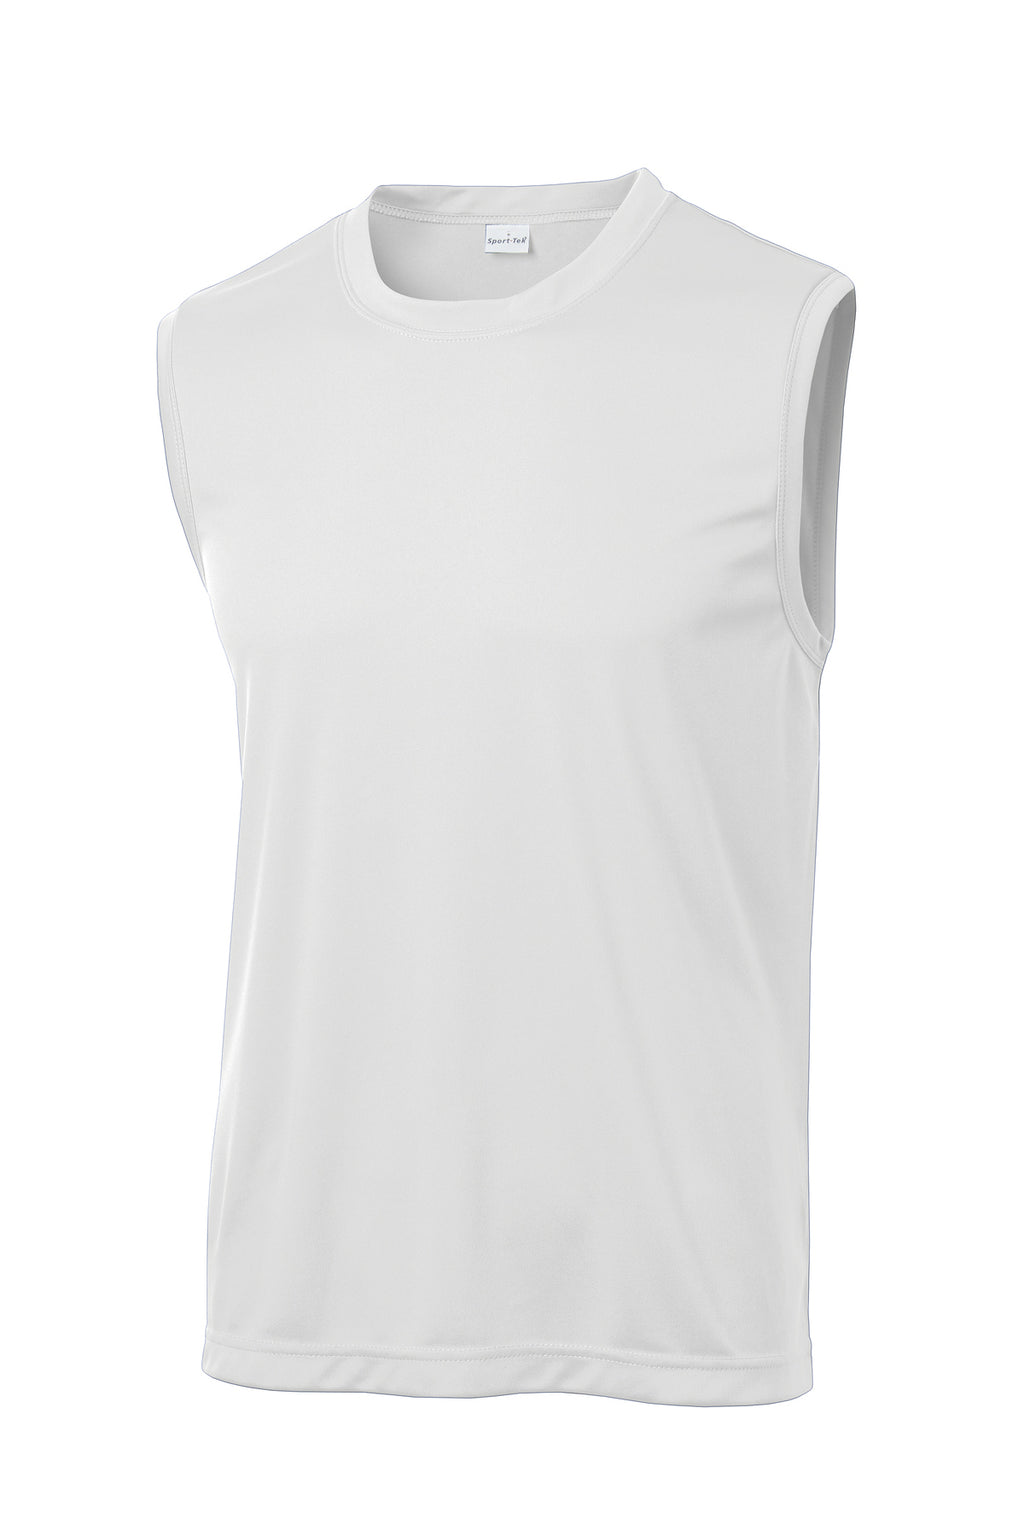 Big Size Muscle Tee Closeout-1